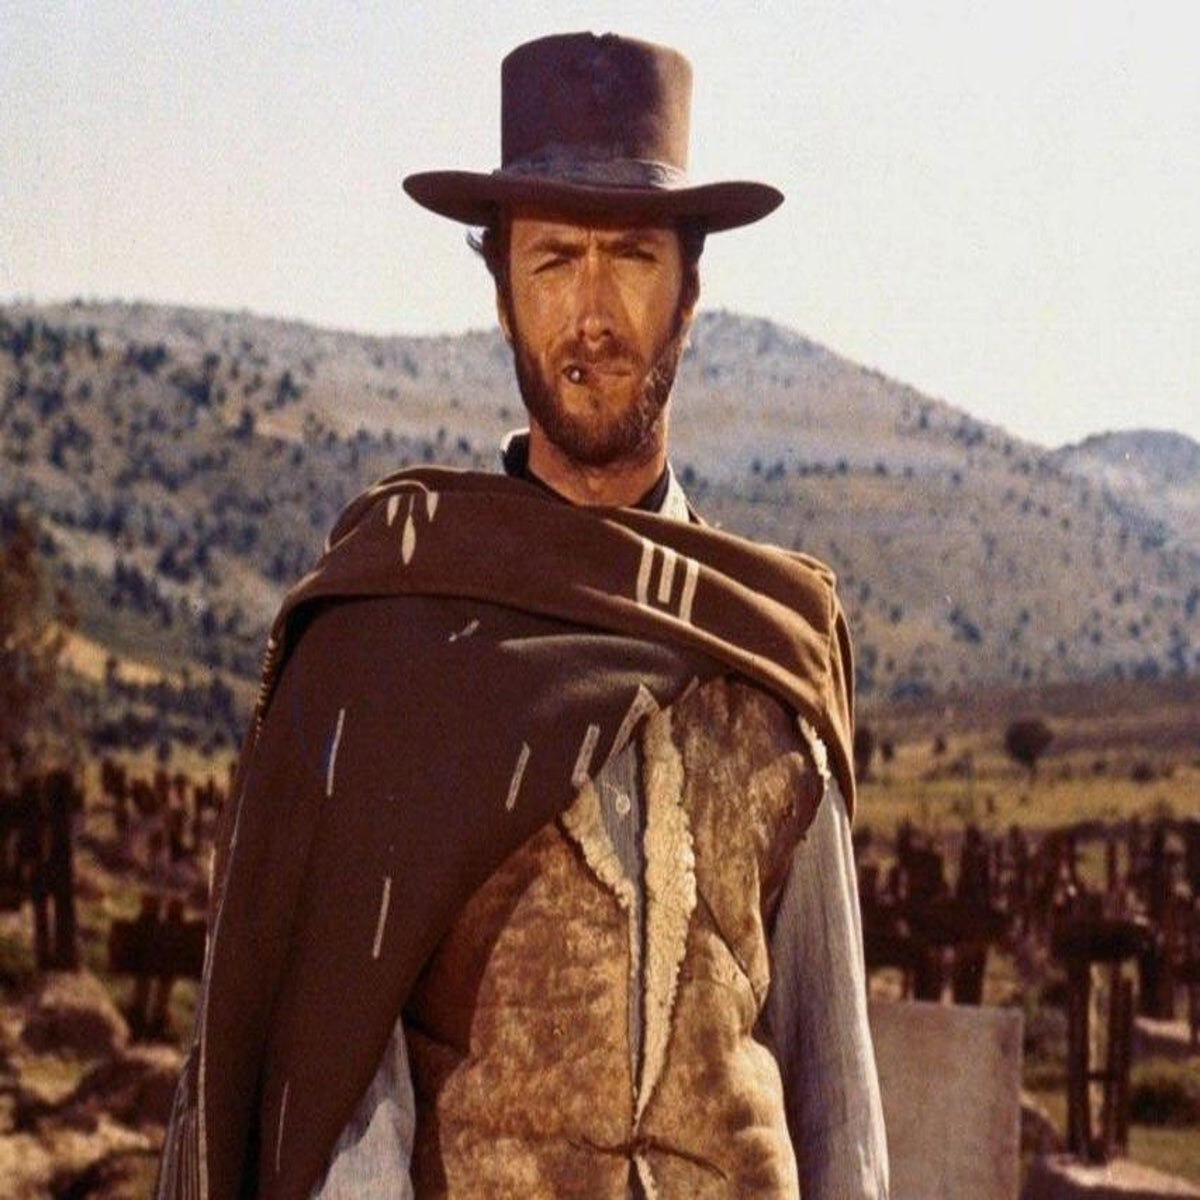 Feasibility Bare overfyldt Moralsk The Magnificent 20: The greatest Westerns of all time | The Independent